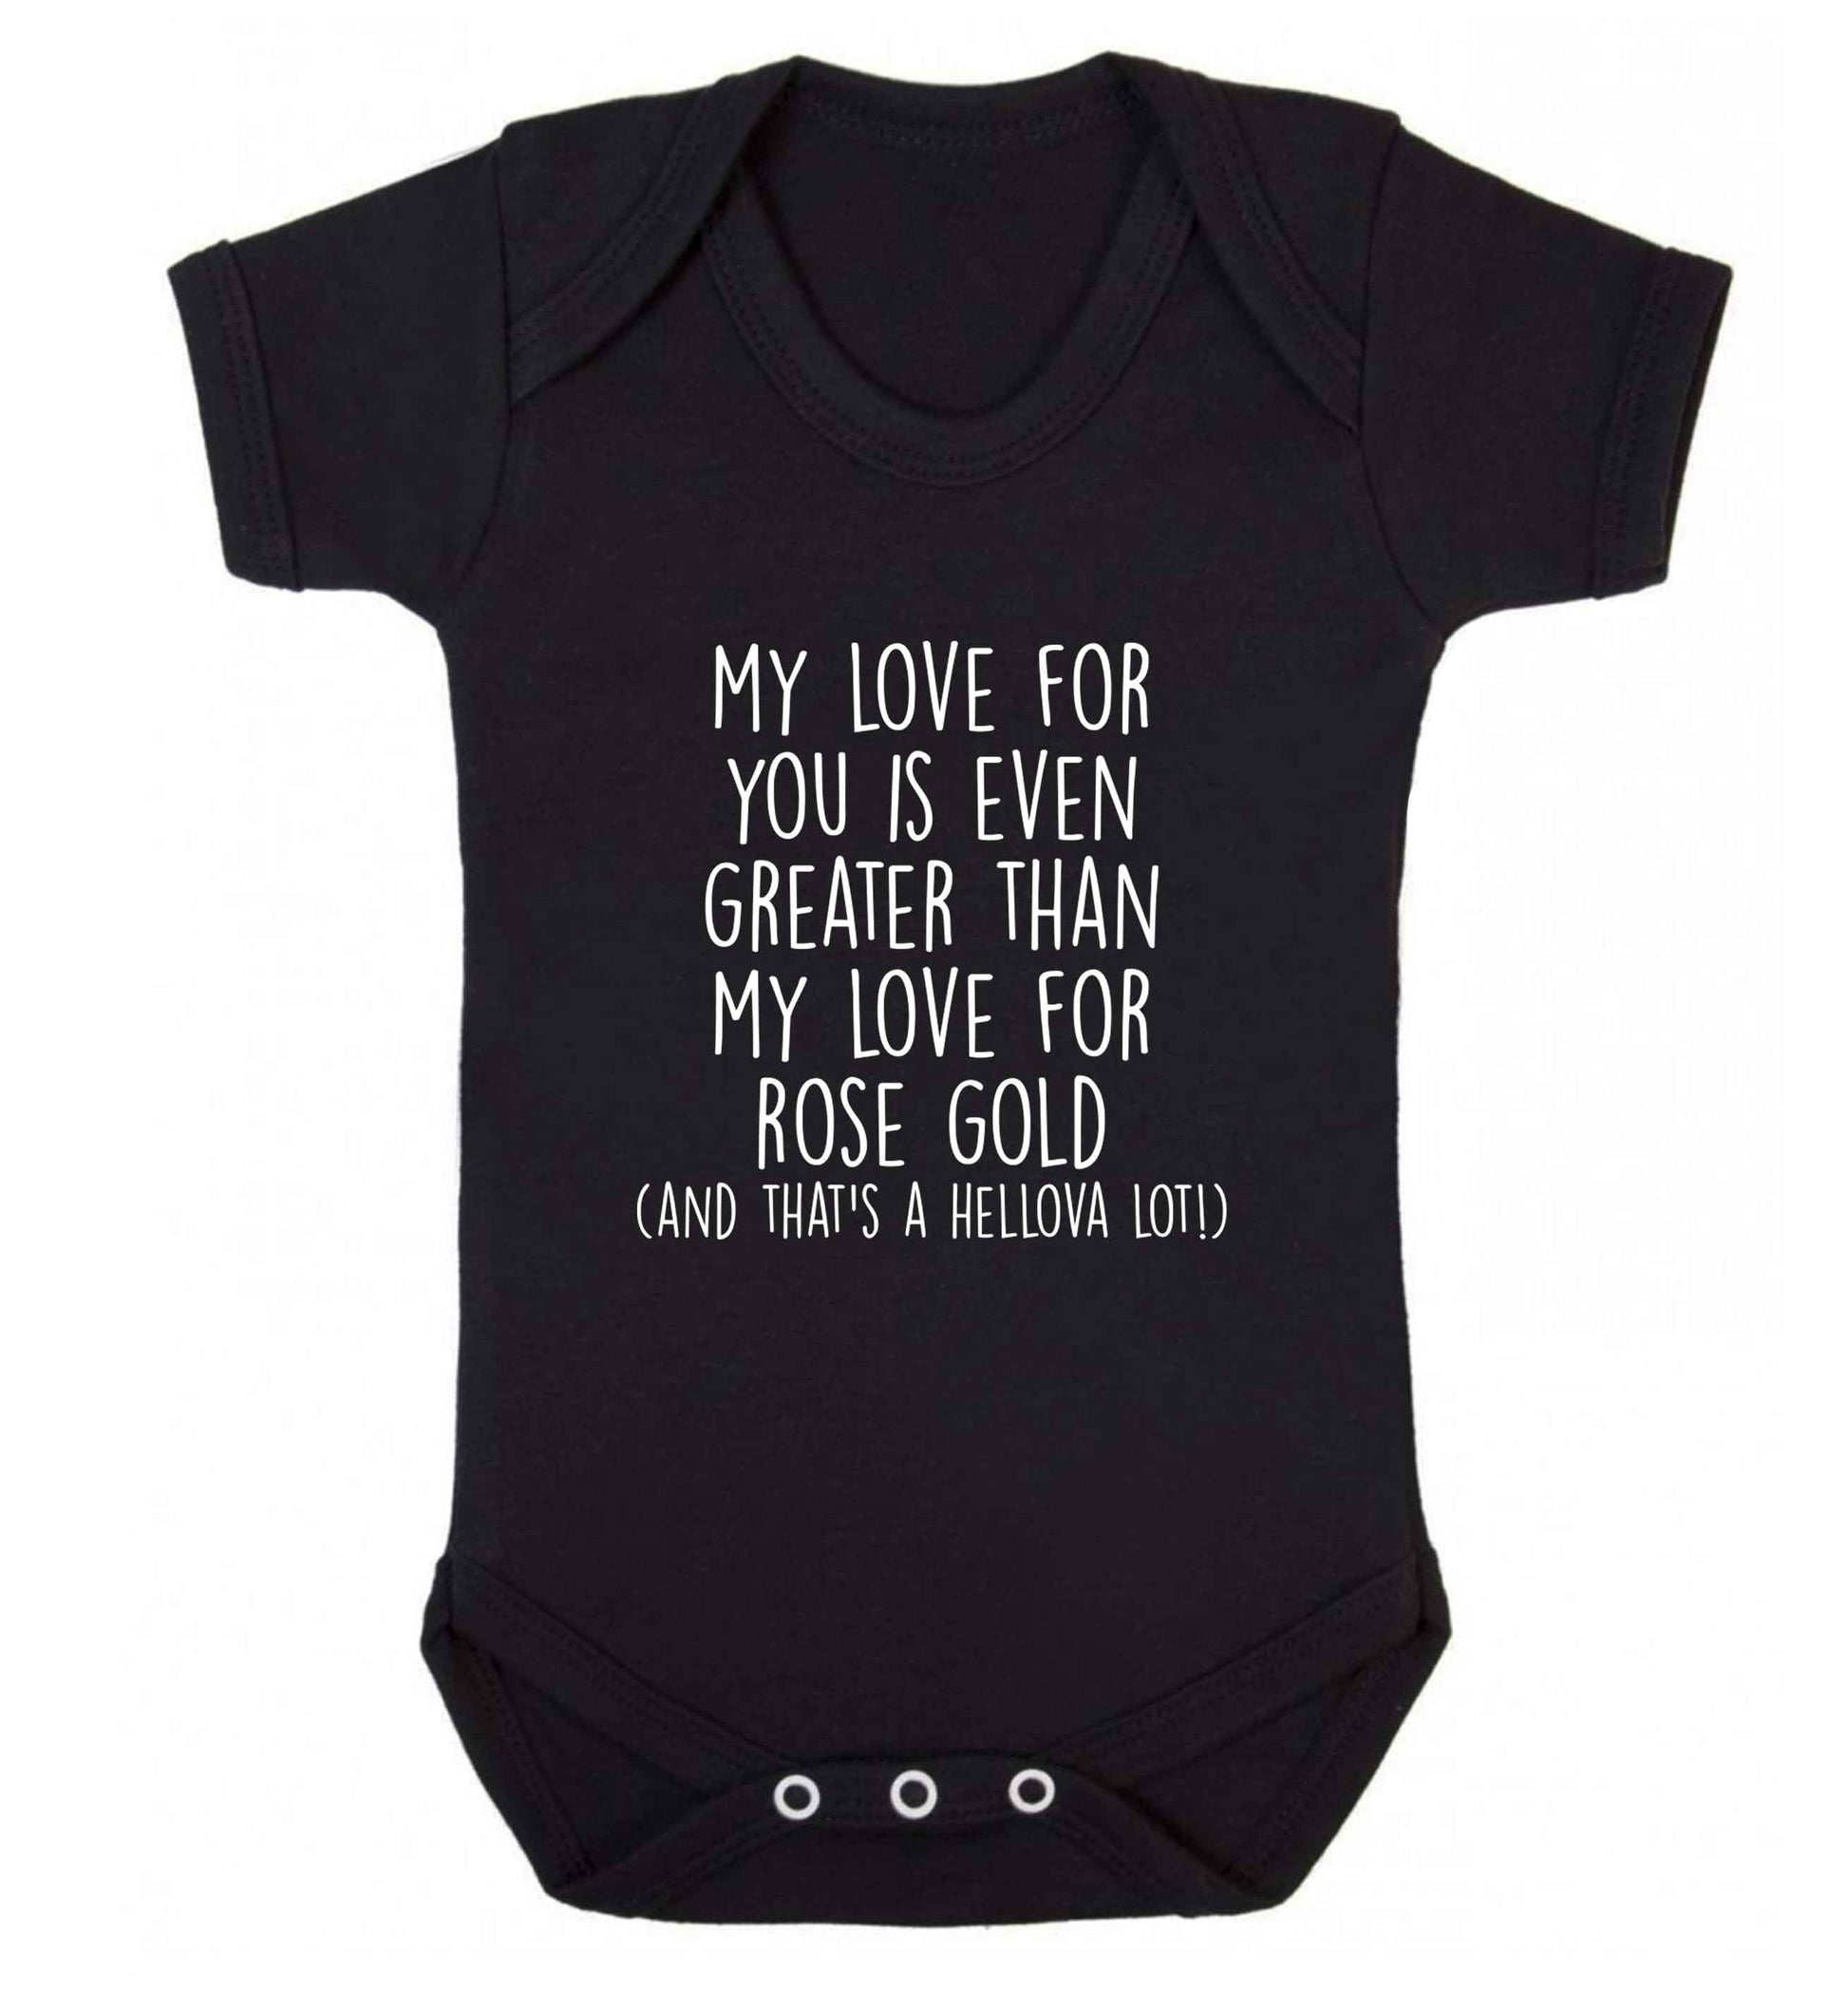 My love for you is even greater than my love for rose gold (and that's a hellova lot) baby vest black 18-24 months